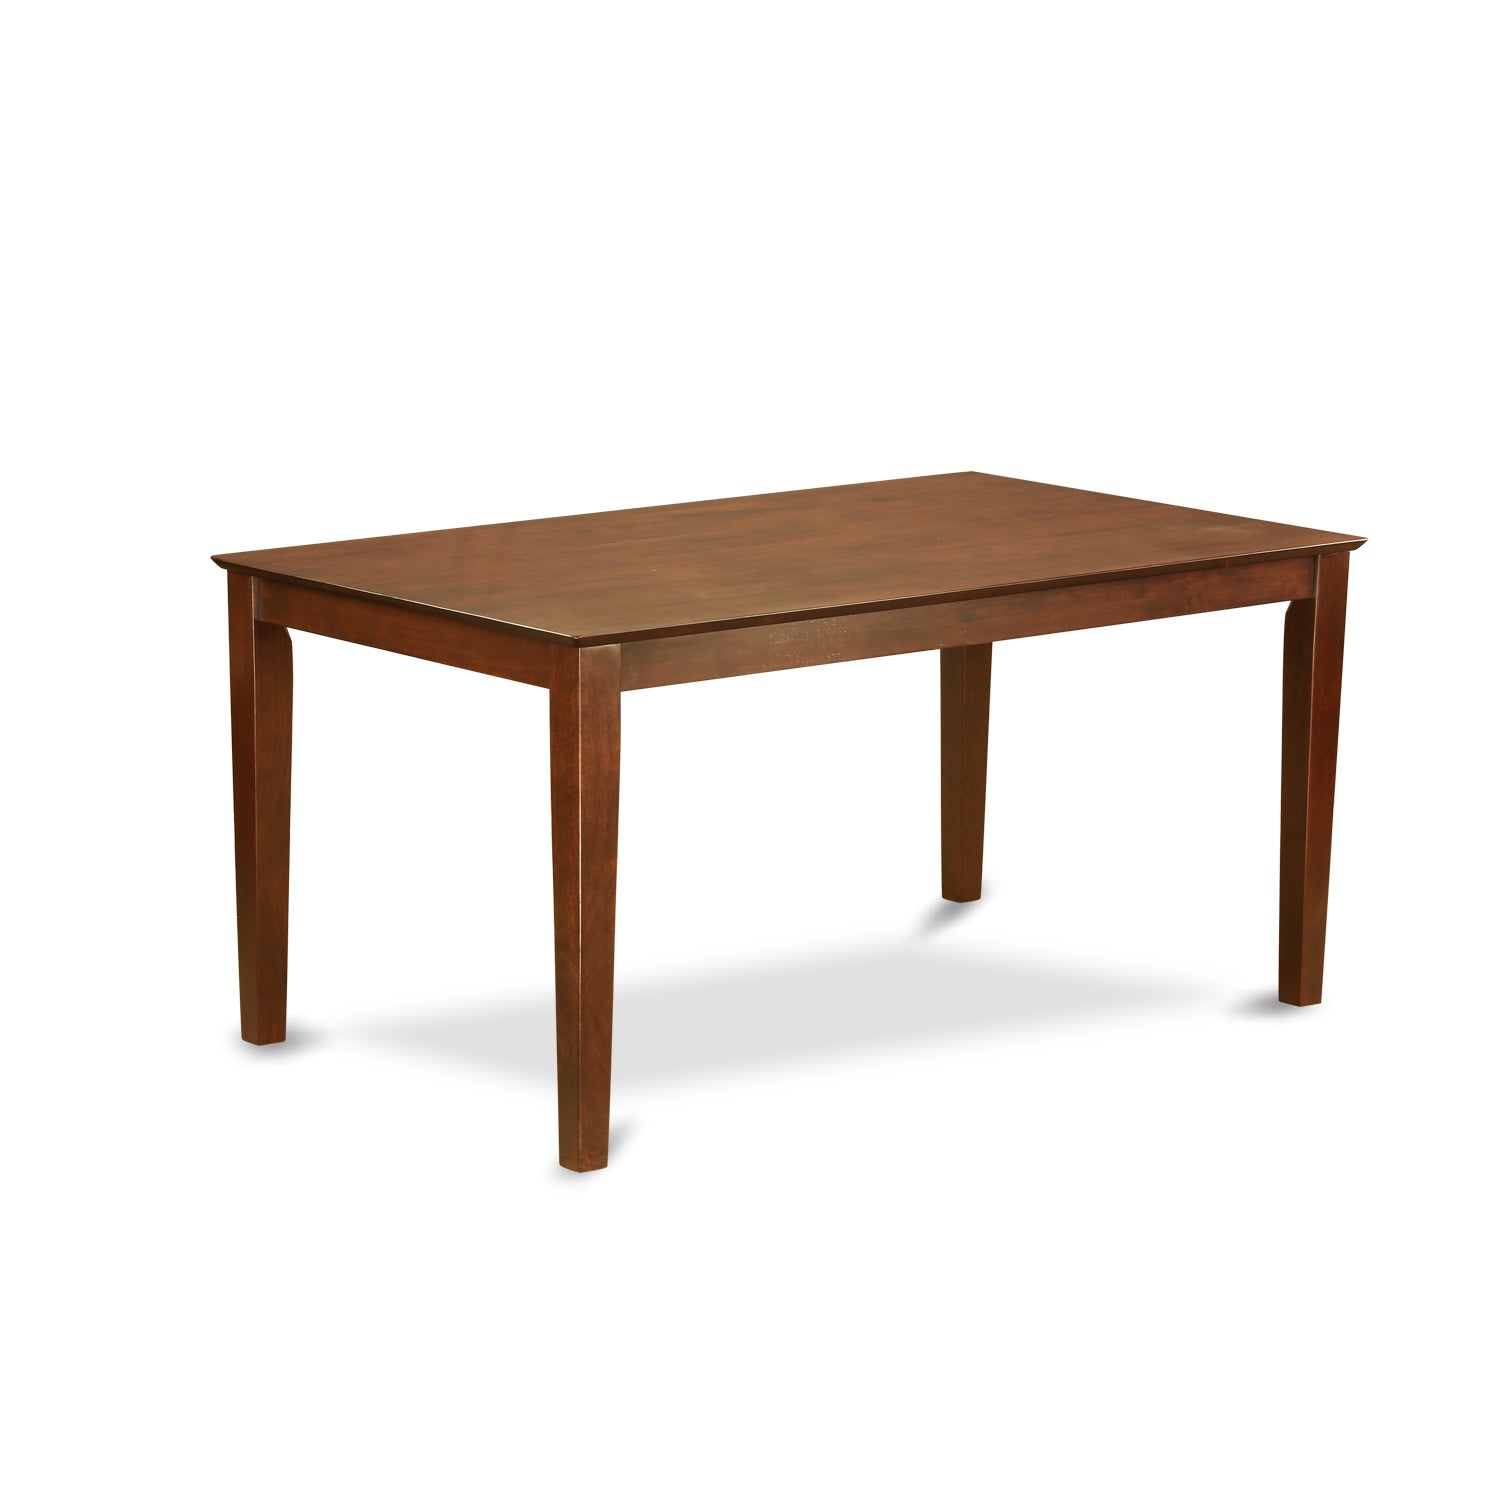 CAAB7-MAH-18 7Pc Rectangle 60" Dining Table And 6 Parson Chair With Mahogany Leg And Linen Fabric Coffee